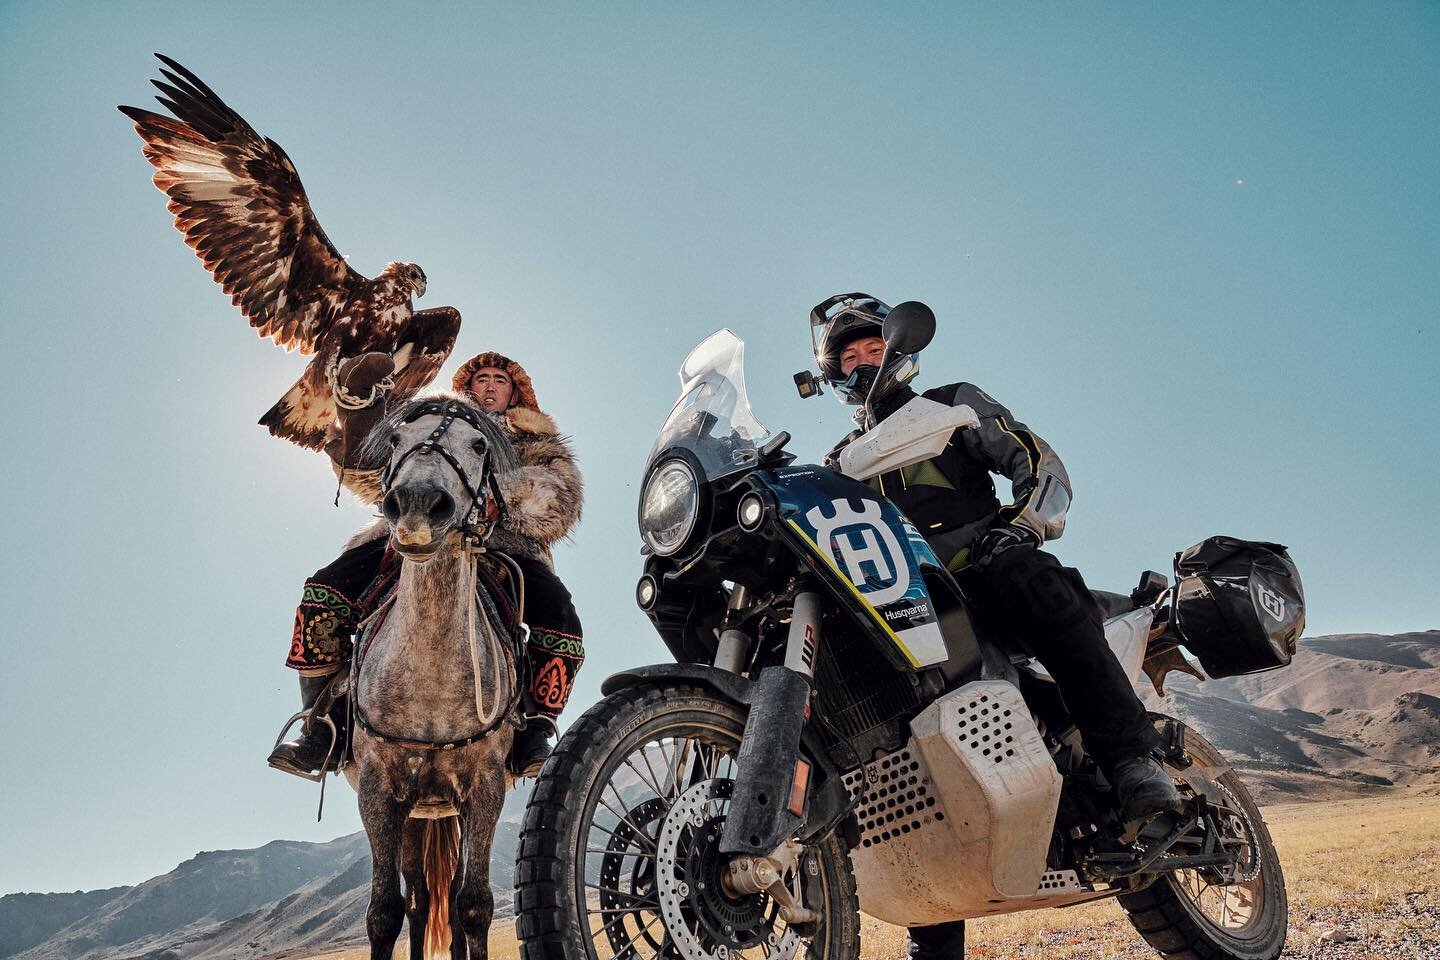 Some rides in this world just don&rsquo;t have a price tag. This is one of them. Our EAGLE HUNTER experience on the outstanding NORDEN 901 EXPEDITION. #onceinalifetime 🇲🇳

Just send us your email via private message for more info.

#mongolia
#norde